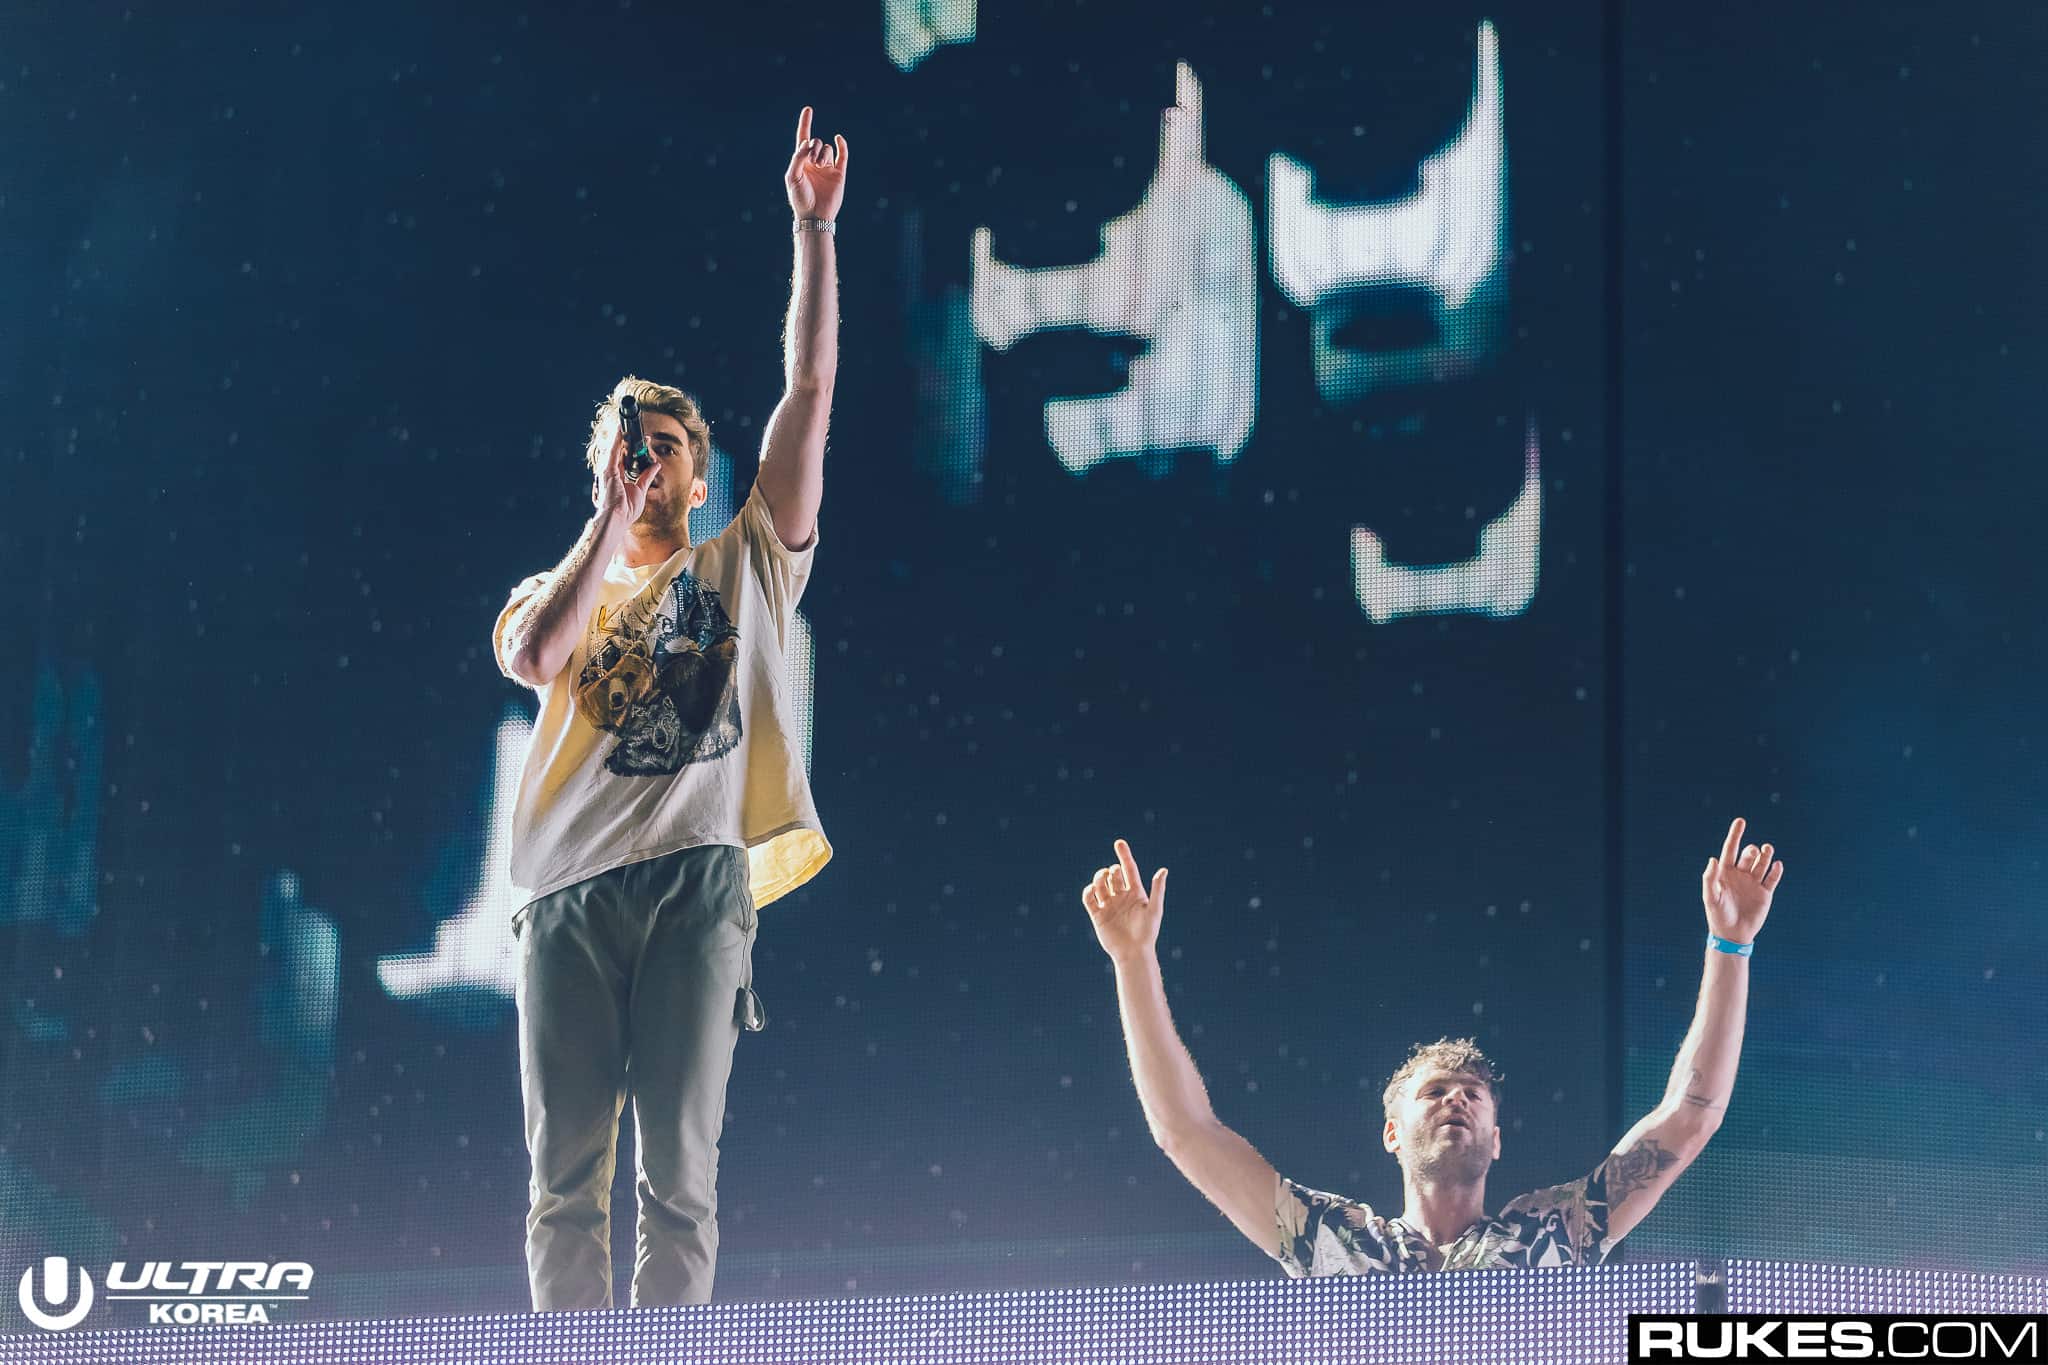 The Chainsmokers headline ‘TIDAL Presents: SLS Live’ at Miami Music Week 2020